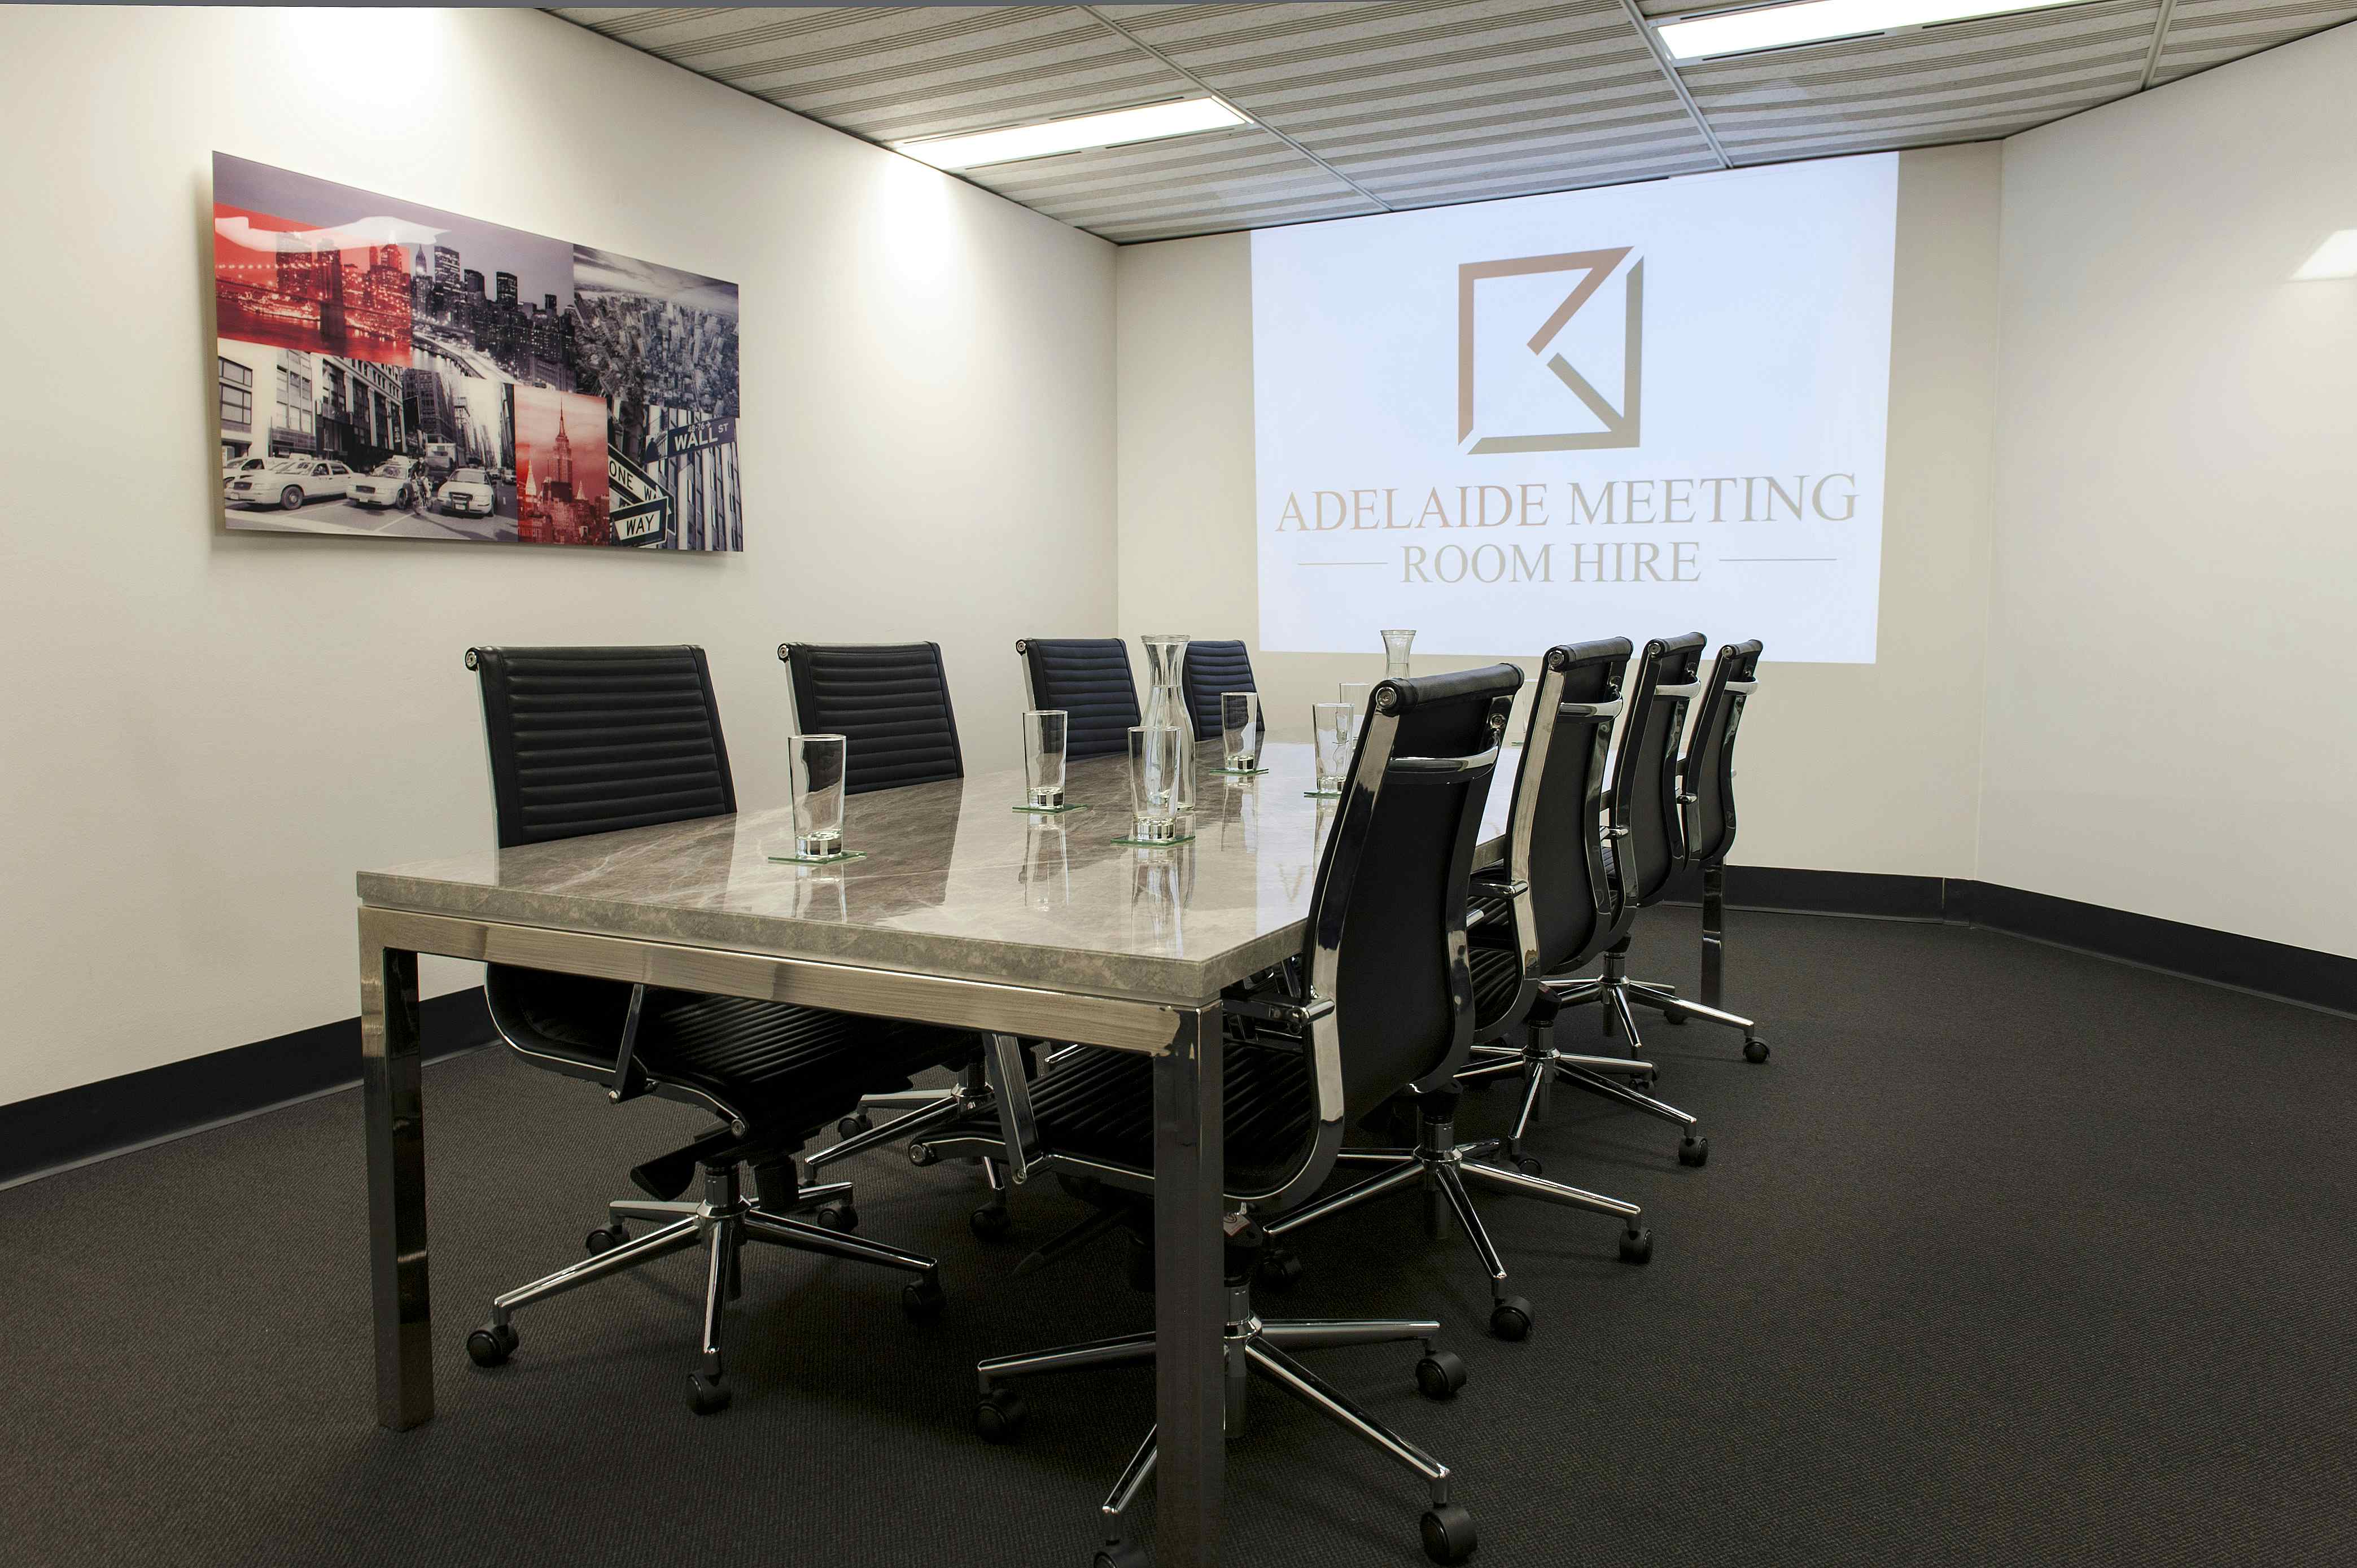 Executive Room, Adelaide Meeting Room Hire